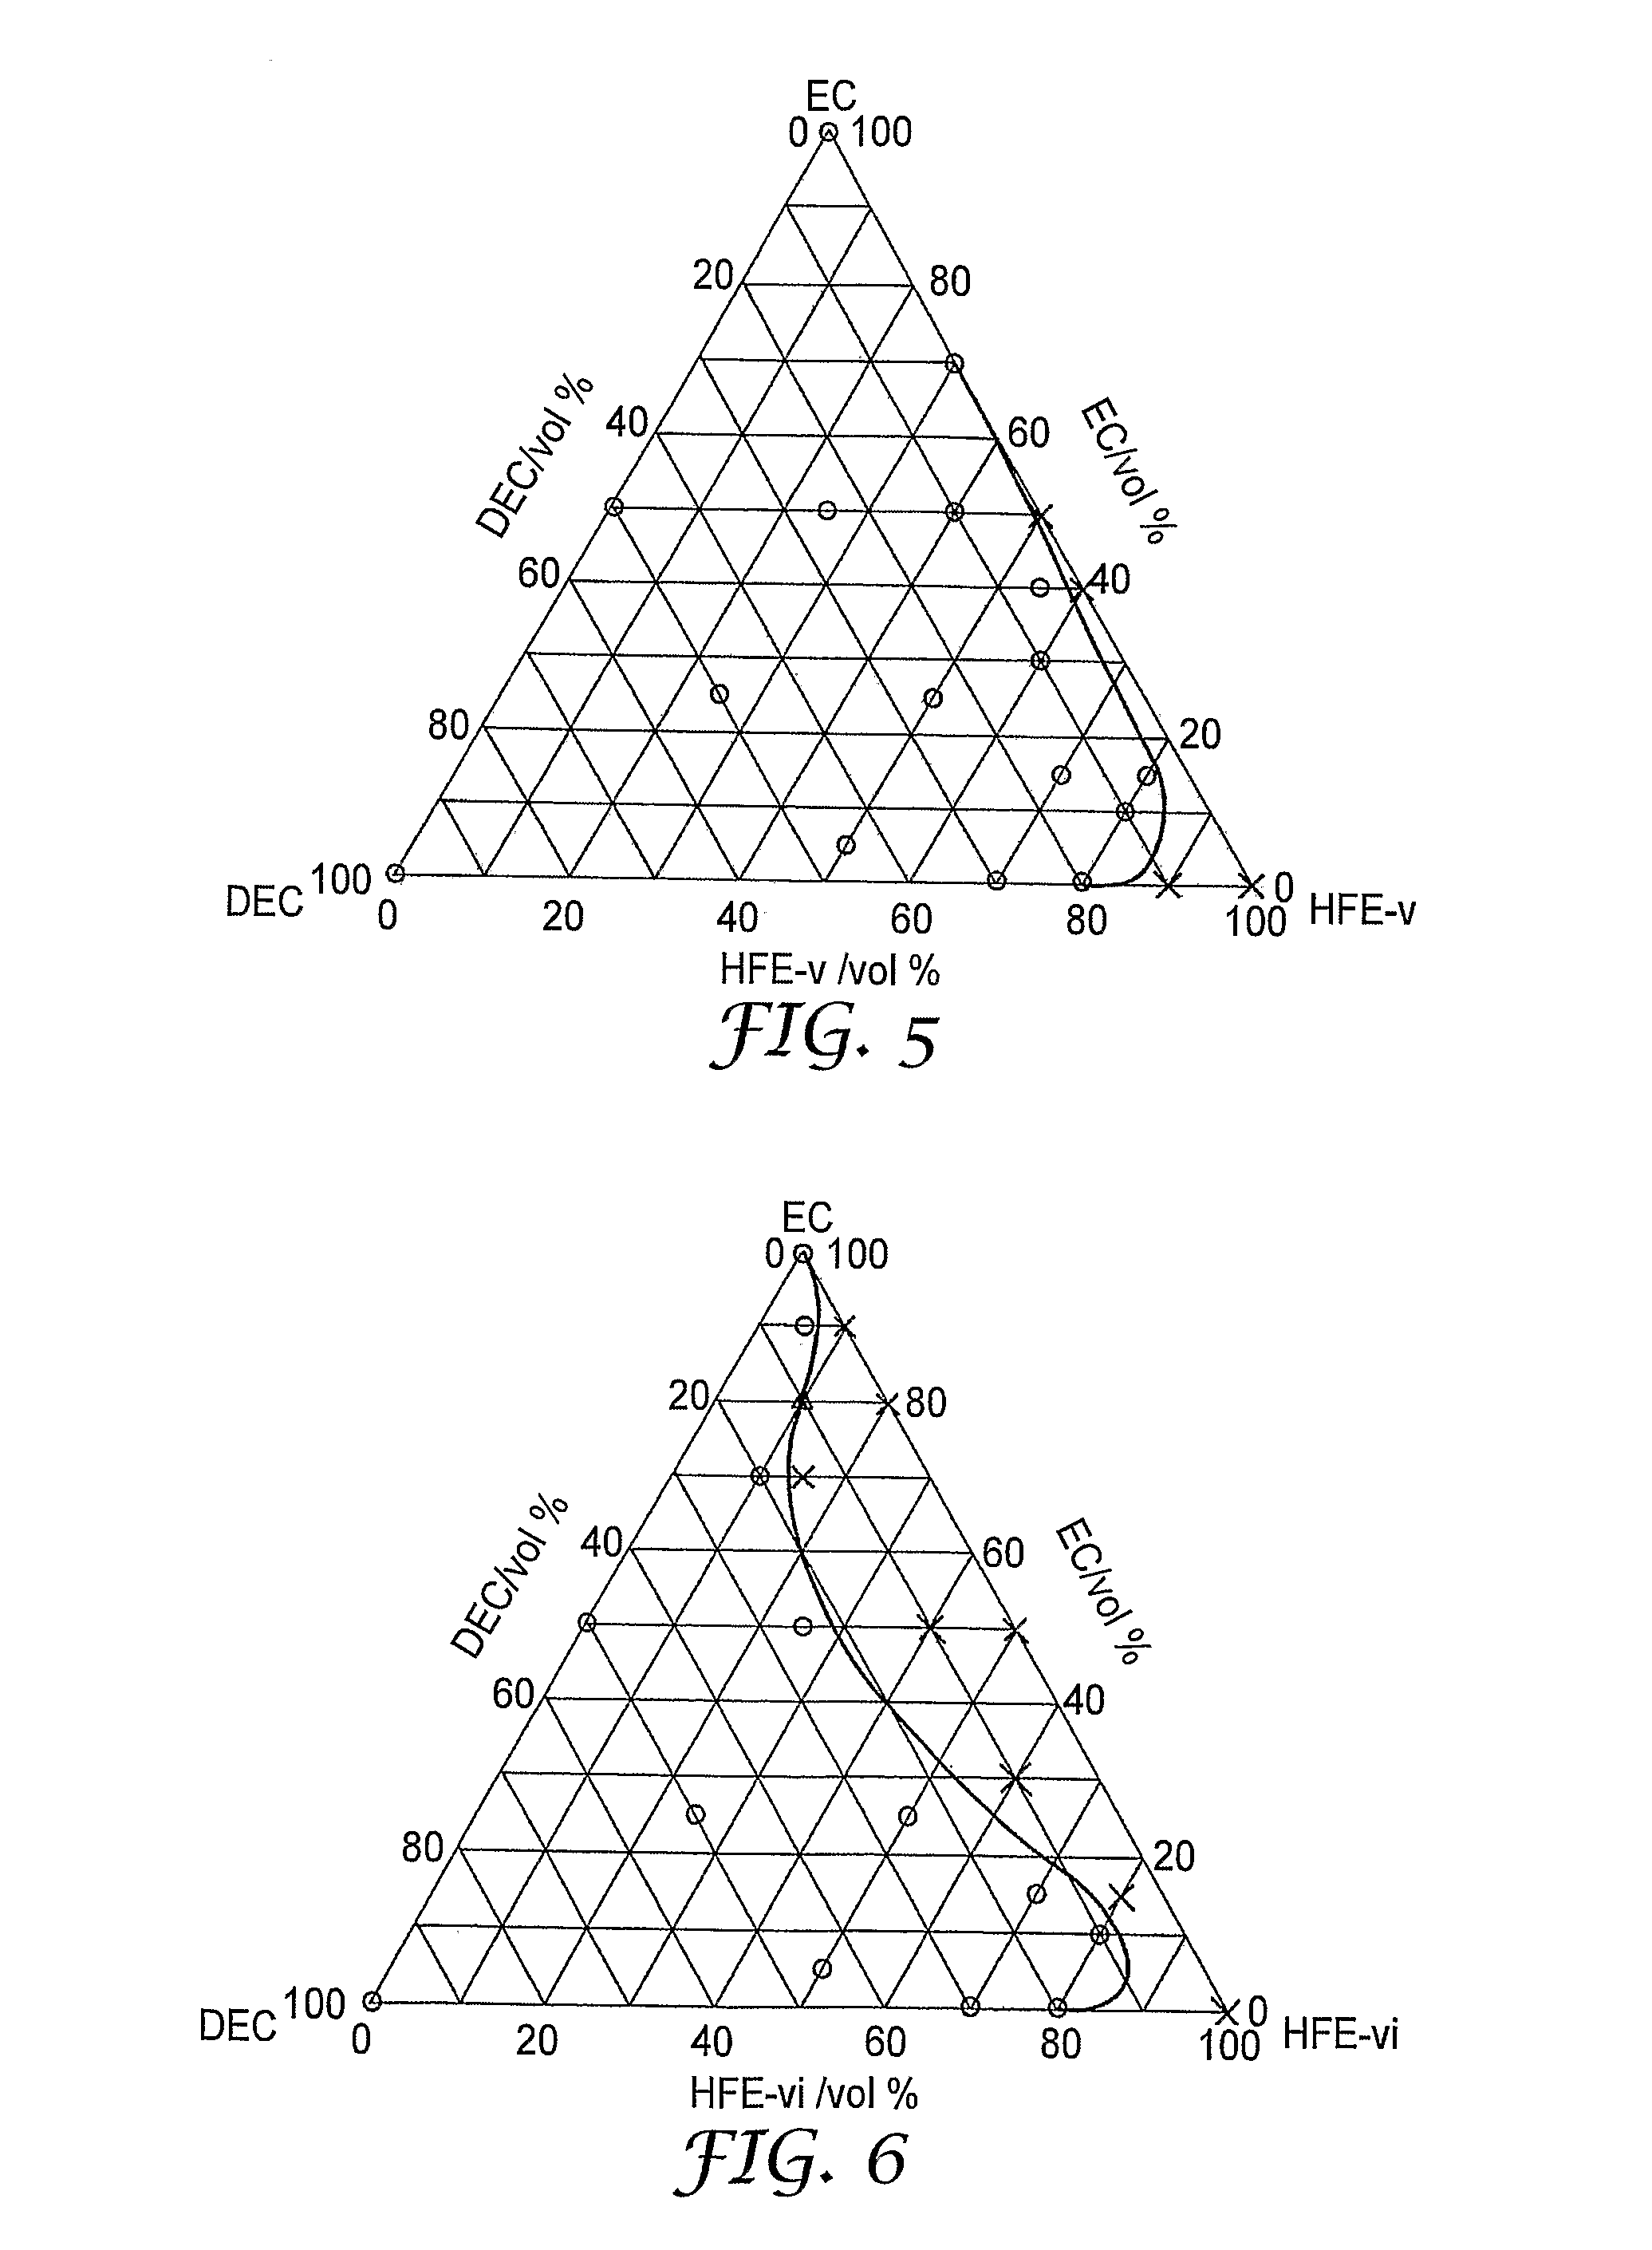 Electrolyte Solutions For Electrochemical Energy Devices